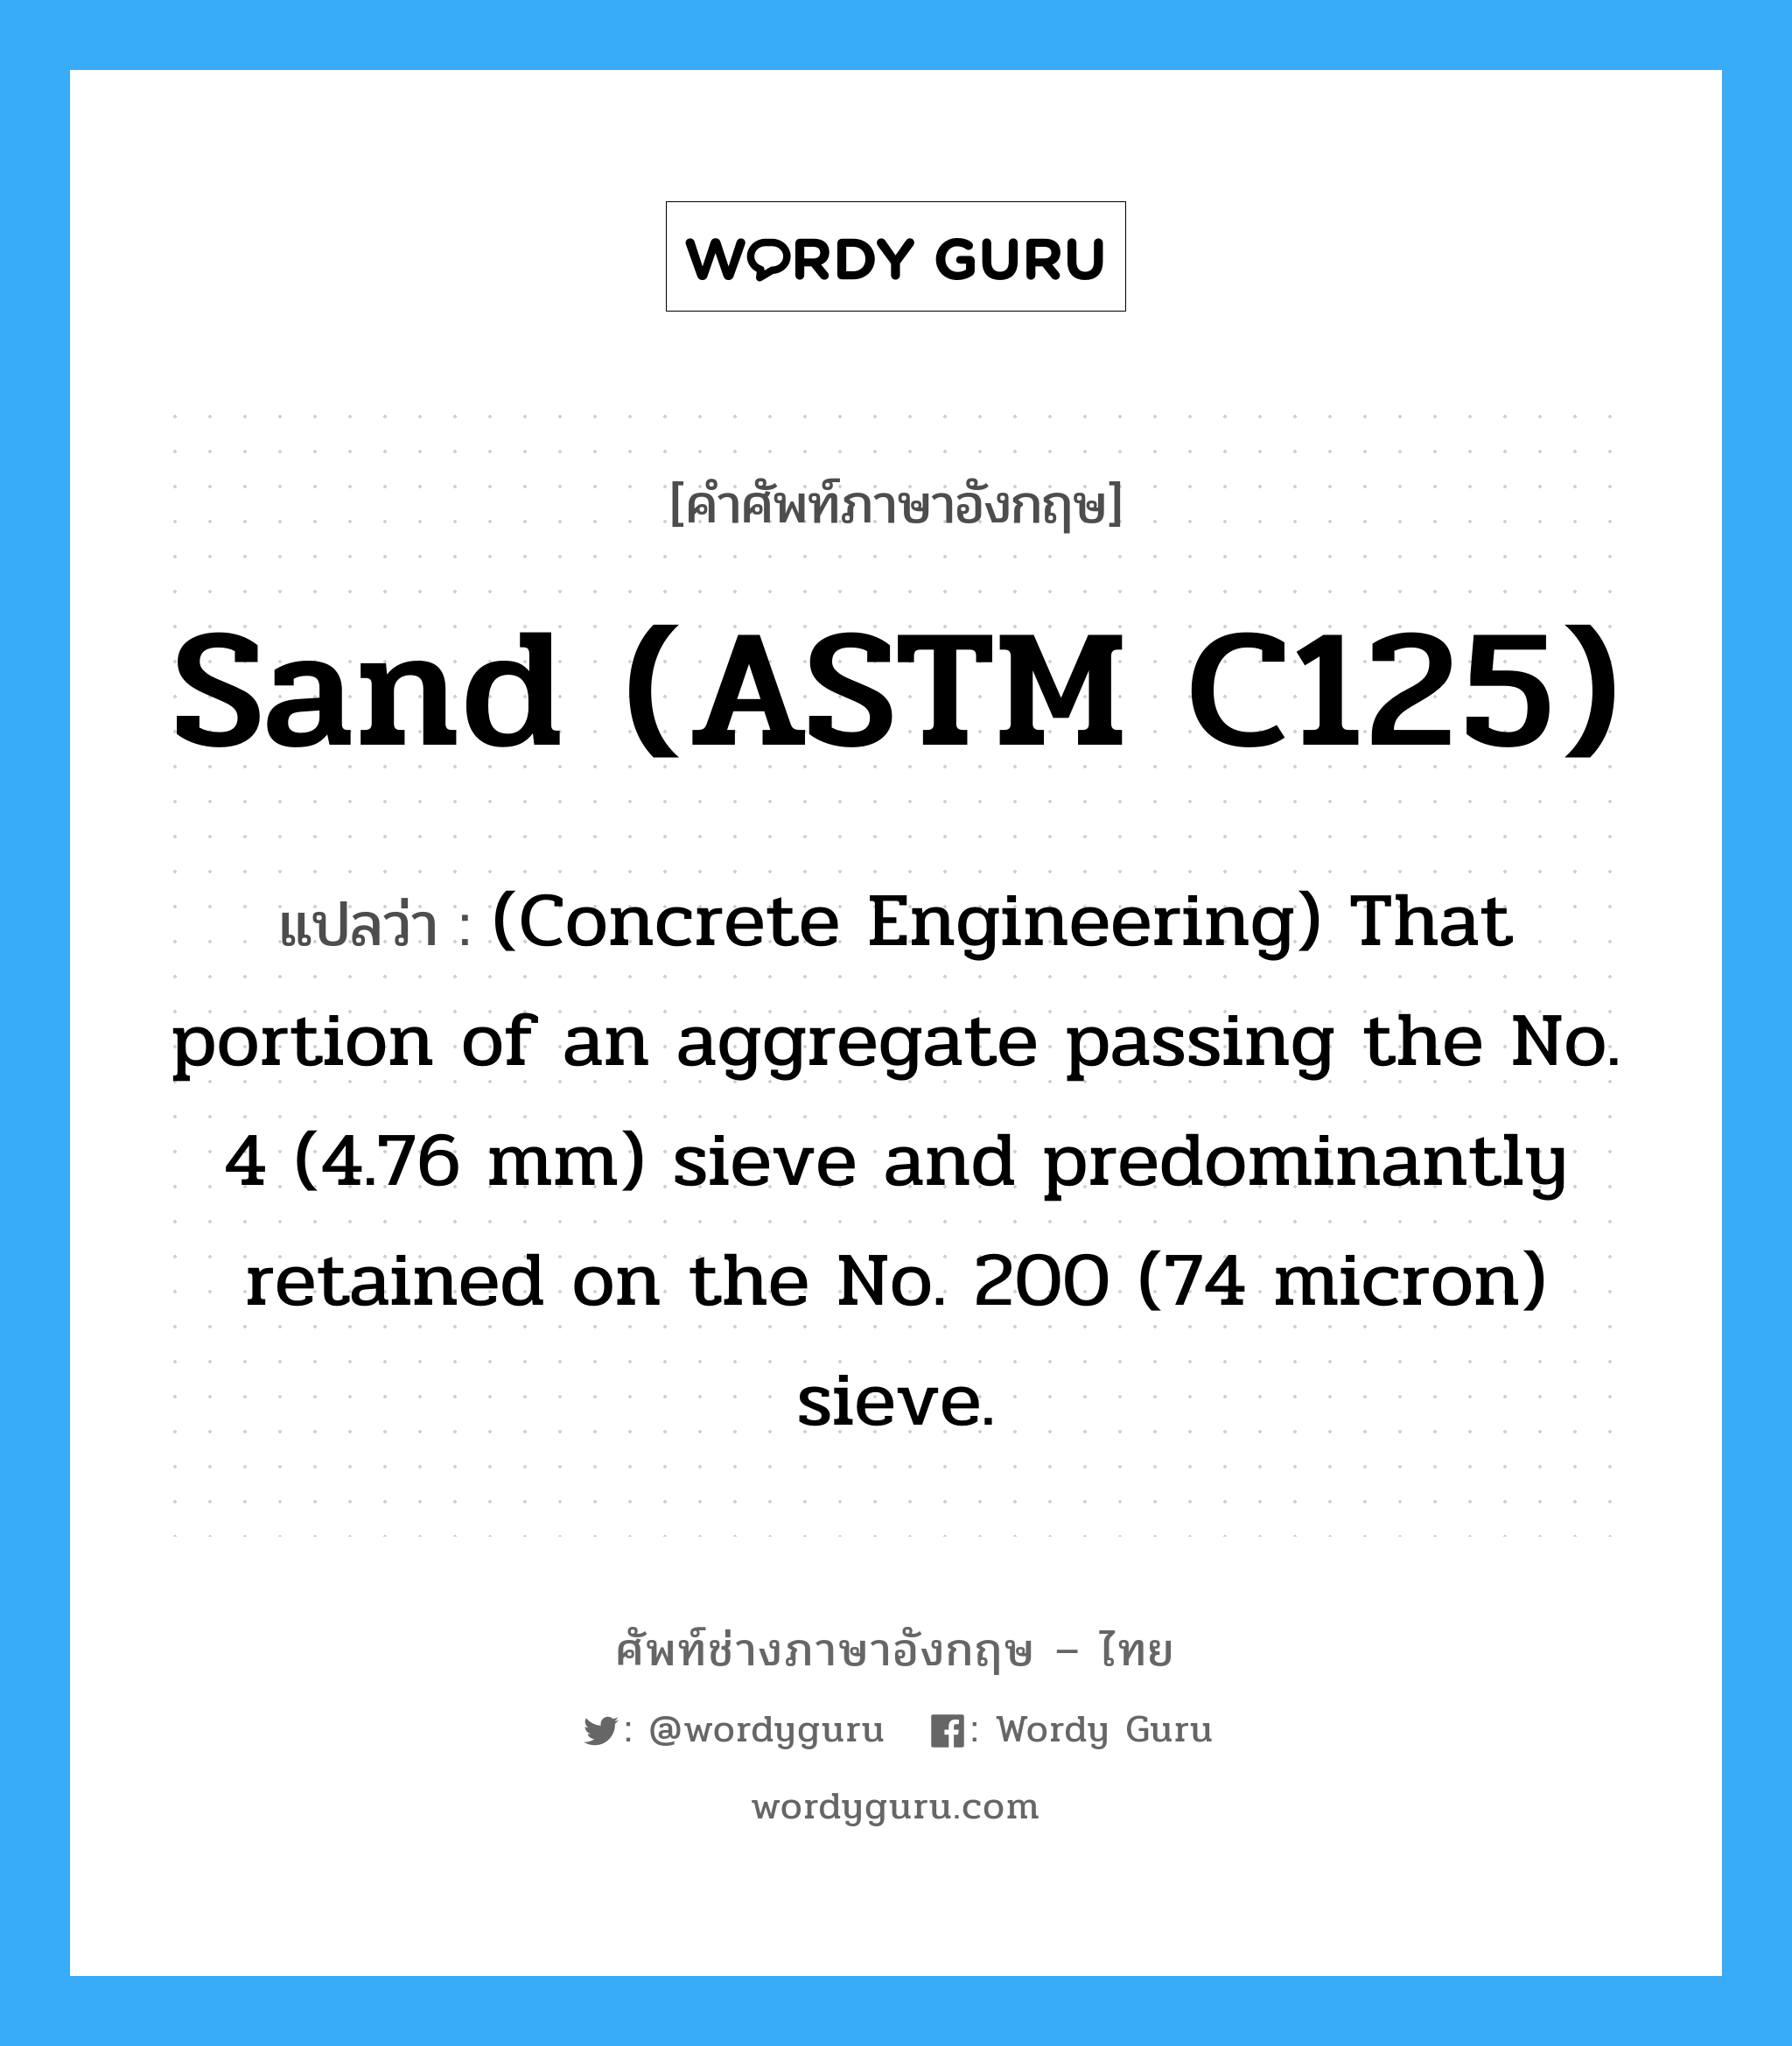 Sand (ASTM C125) แปลว่า?, คำศัพท์ช่างภาษาอังกฤษ - ไทย Sand (ASTM C125) คำศัพท์ภาษาอังกฤษ Sand (ASTM C125) แปลว่า (Concrete Engineering) That portion of an aggregate passing the No. 4 (4.76 mm) sieve and predominantly retained on the No. 200 (74 micron) sieve.